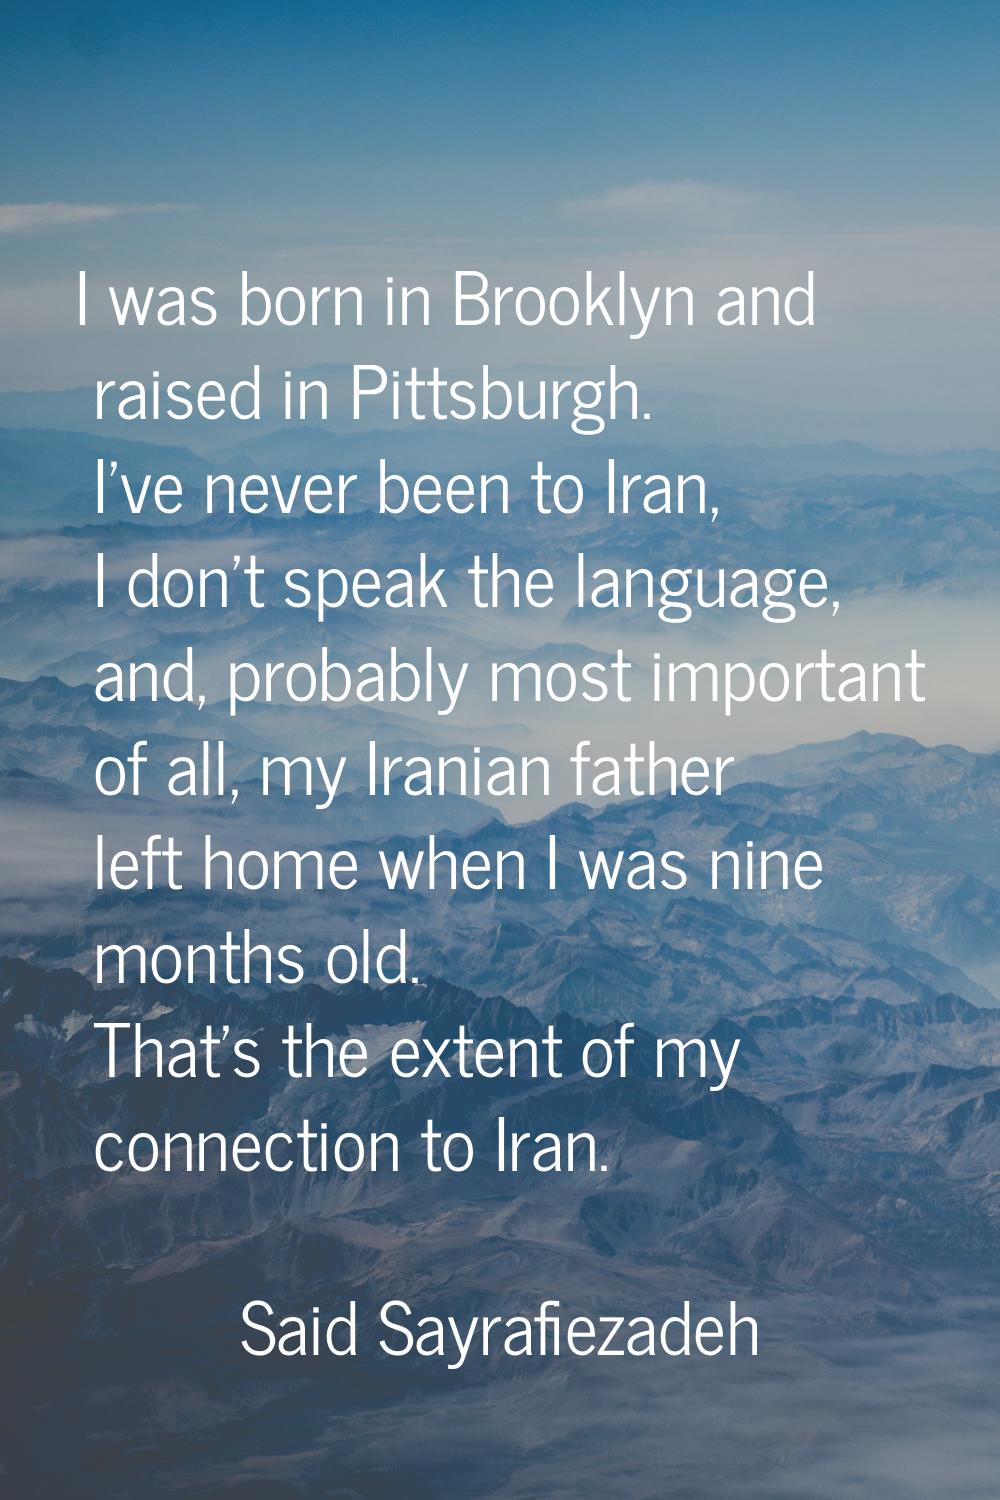 I was born in Brooklyn and raised in Pittsburgh. I've never been to Iran, I don't speak the languag